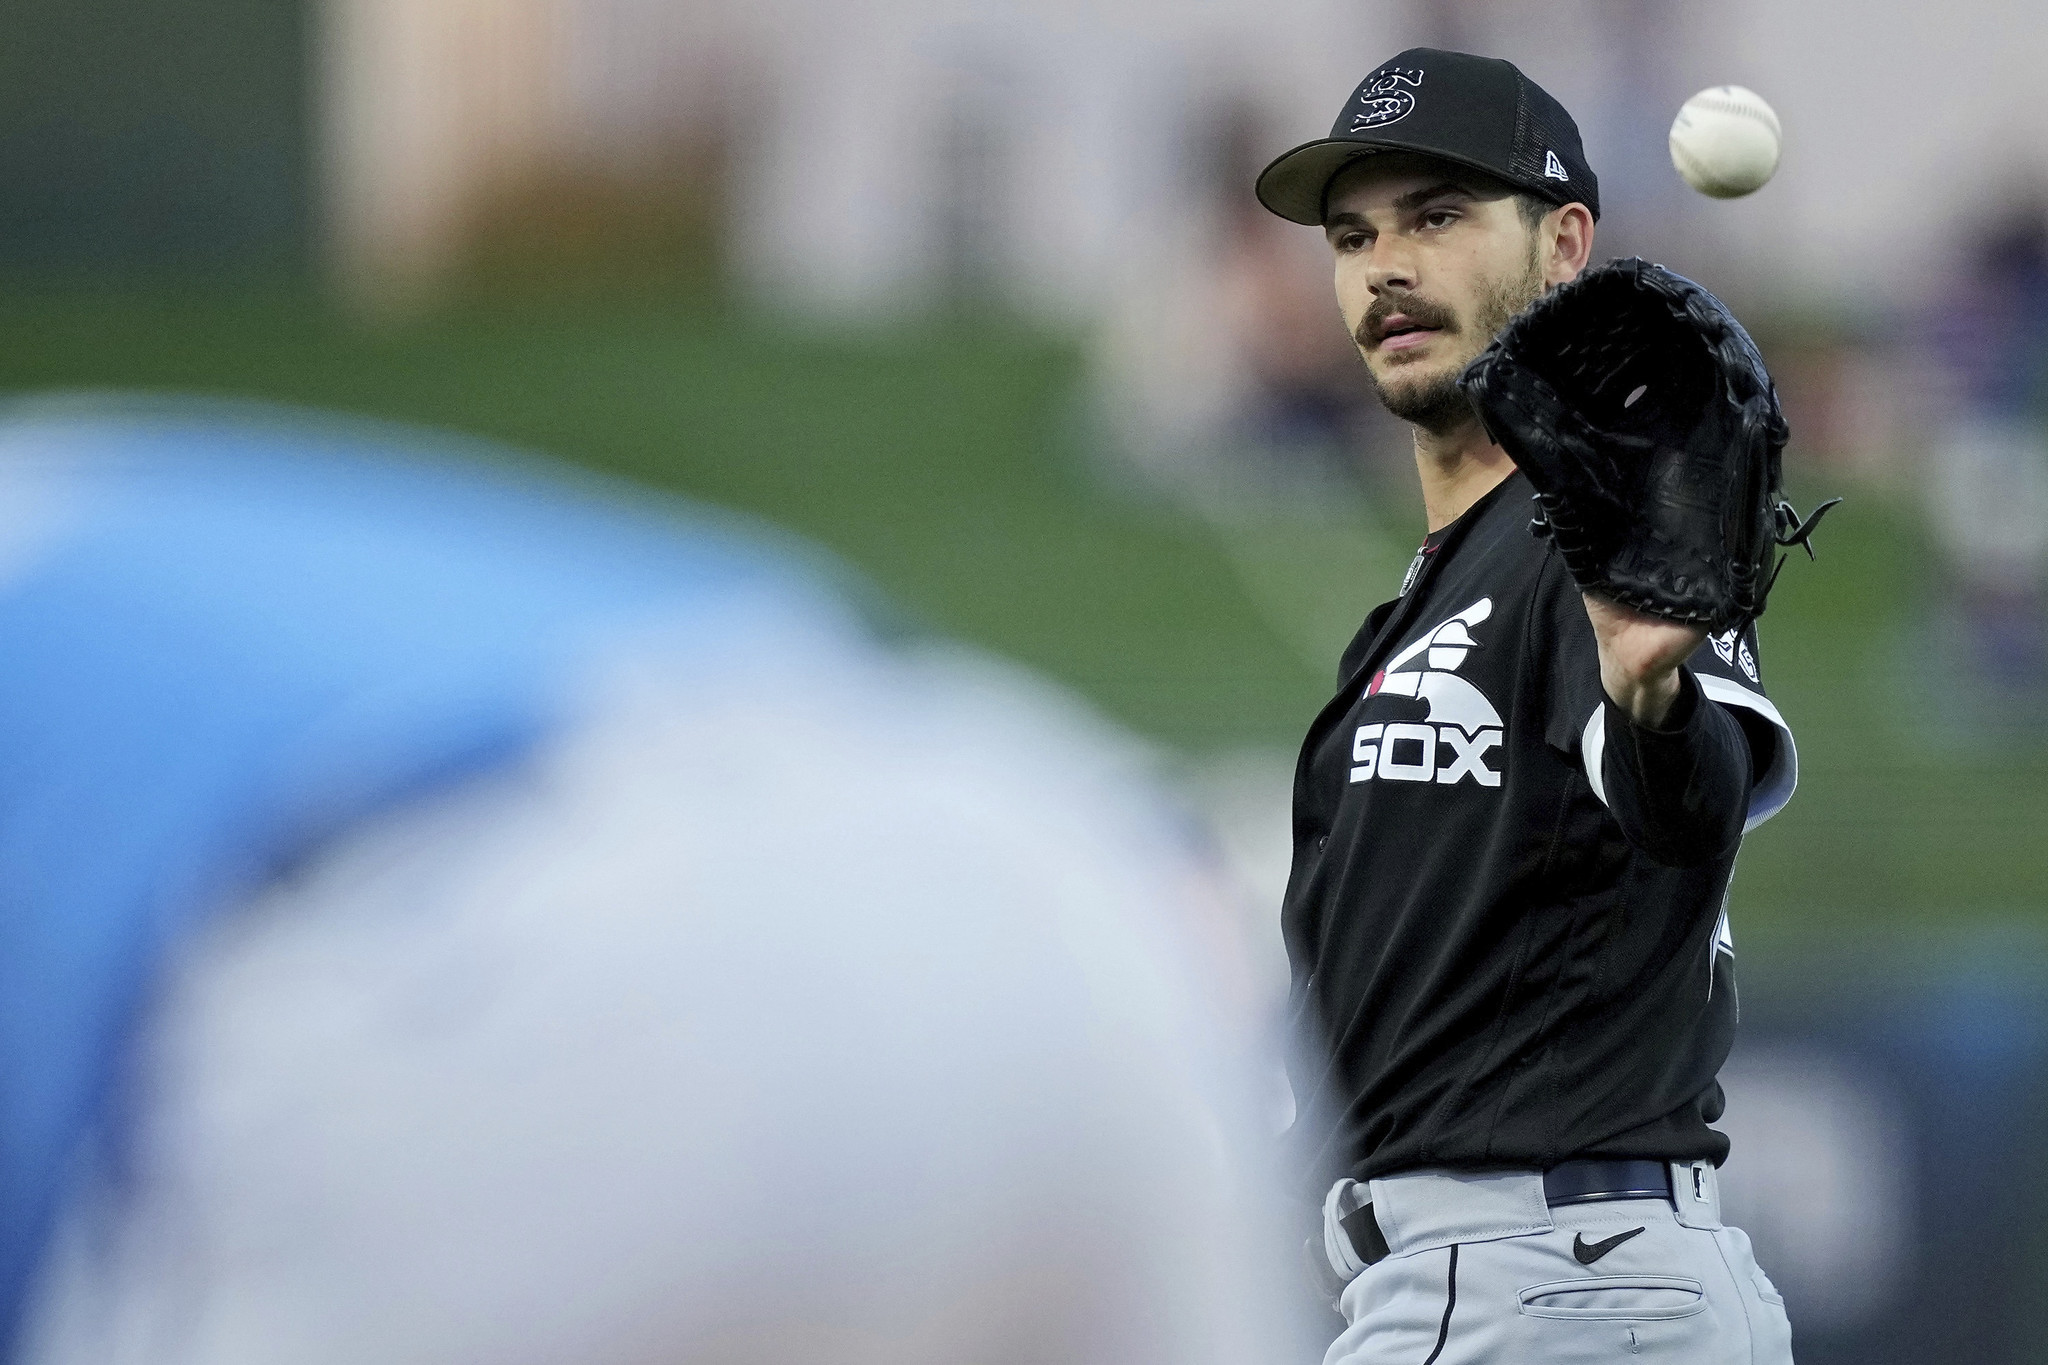 White Sox' Dylan Cease expands his horizons - Chicago Sun-Times